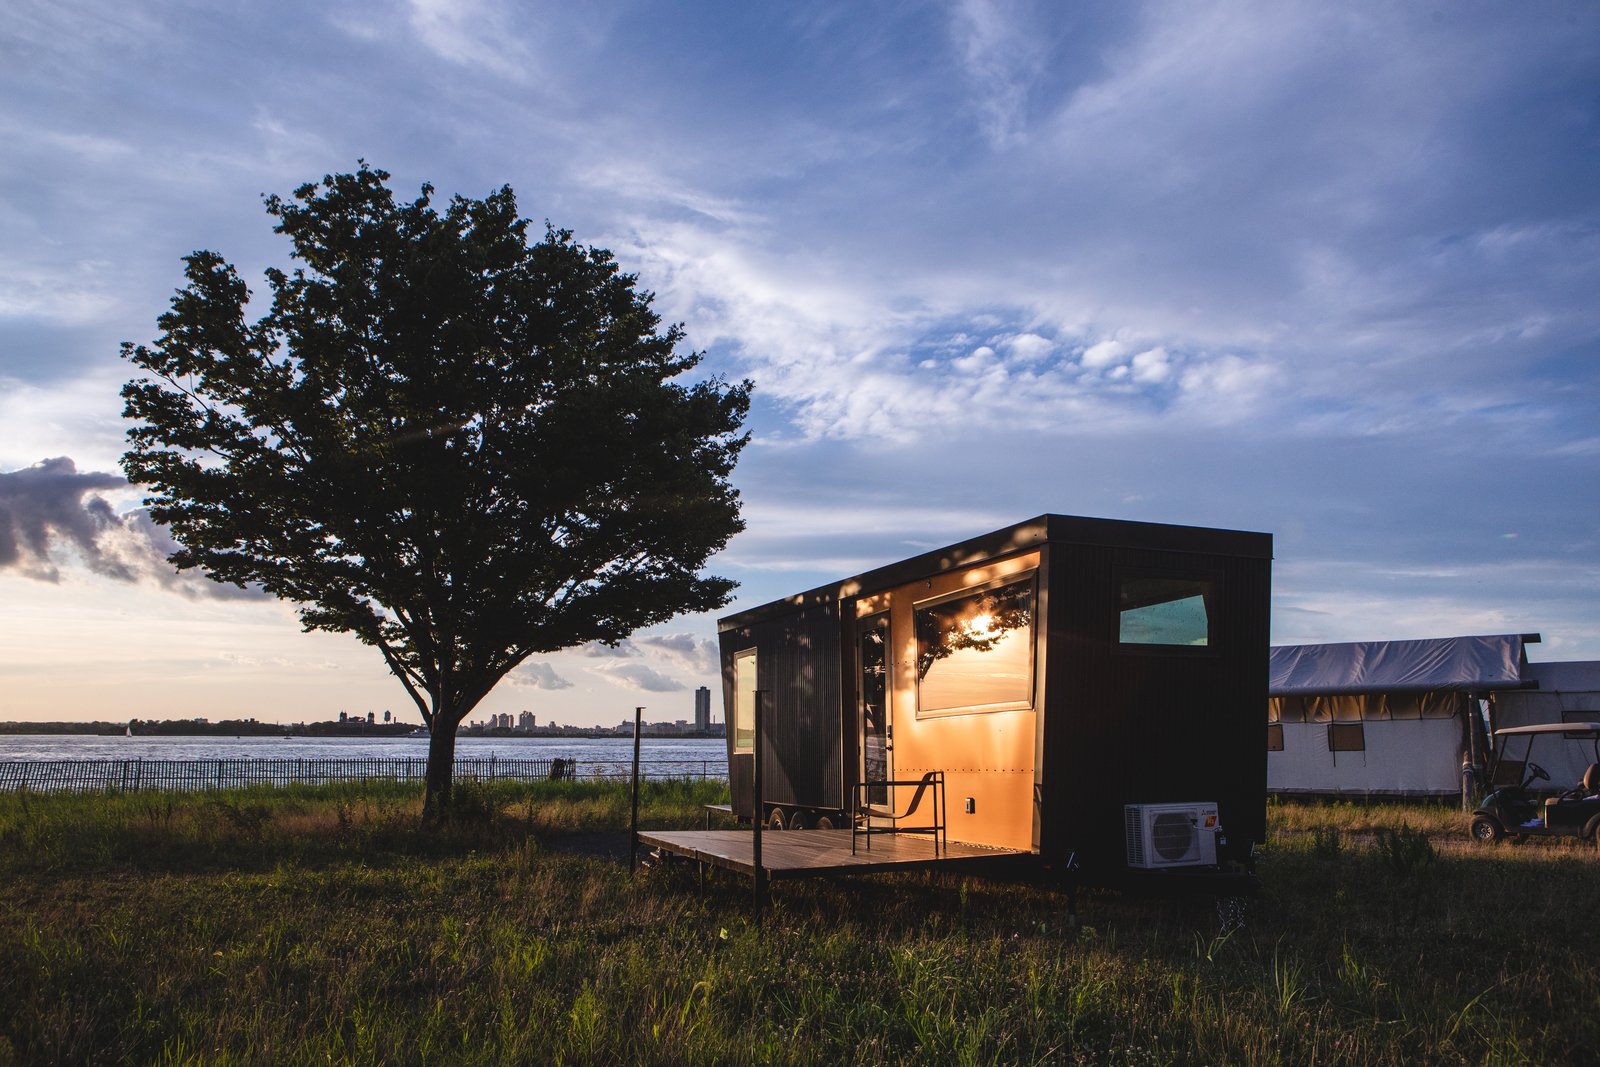 Outlook Shelter epitomizes rugged luxury. "All our features and innovations are integrated in one modular unit, so we can move and operate it quickly," says Peter Mack, founder and CEO of Collective Retreats.